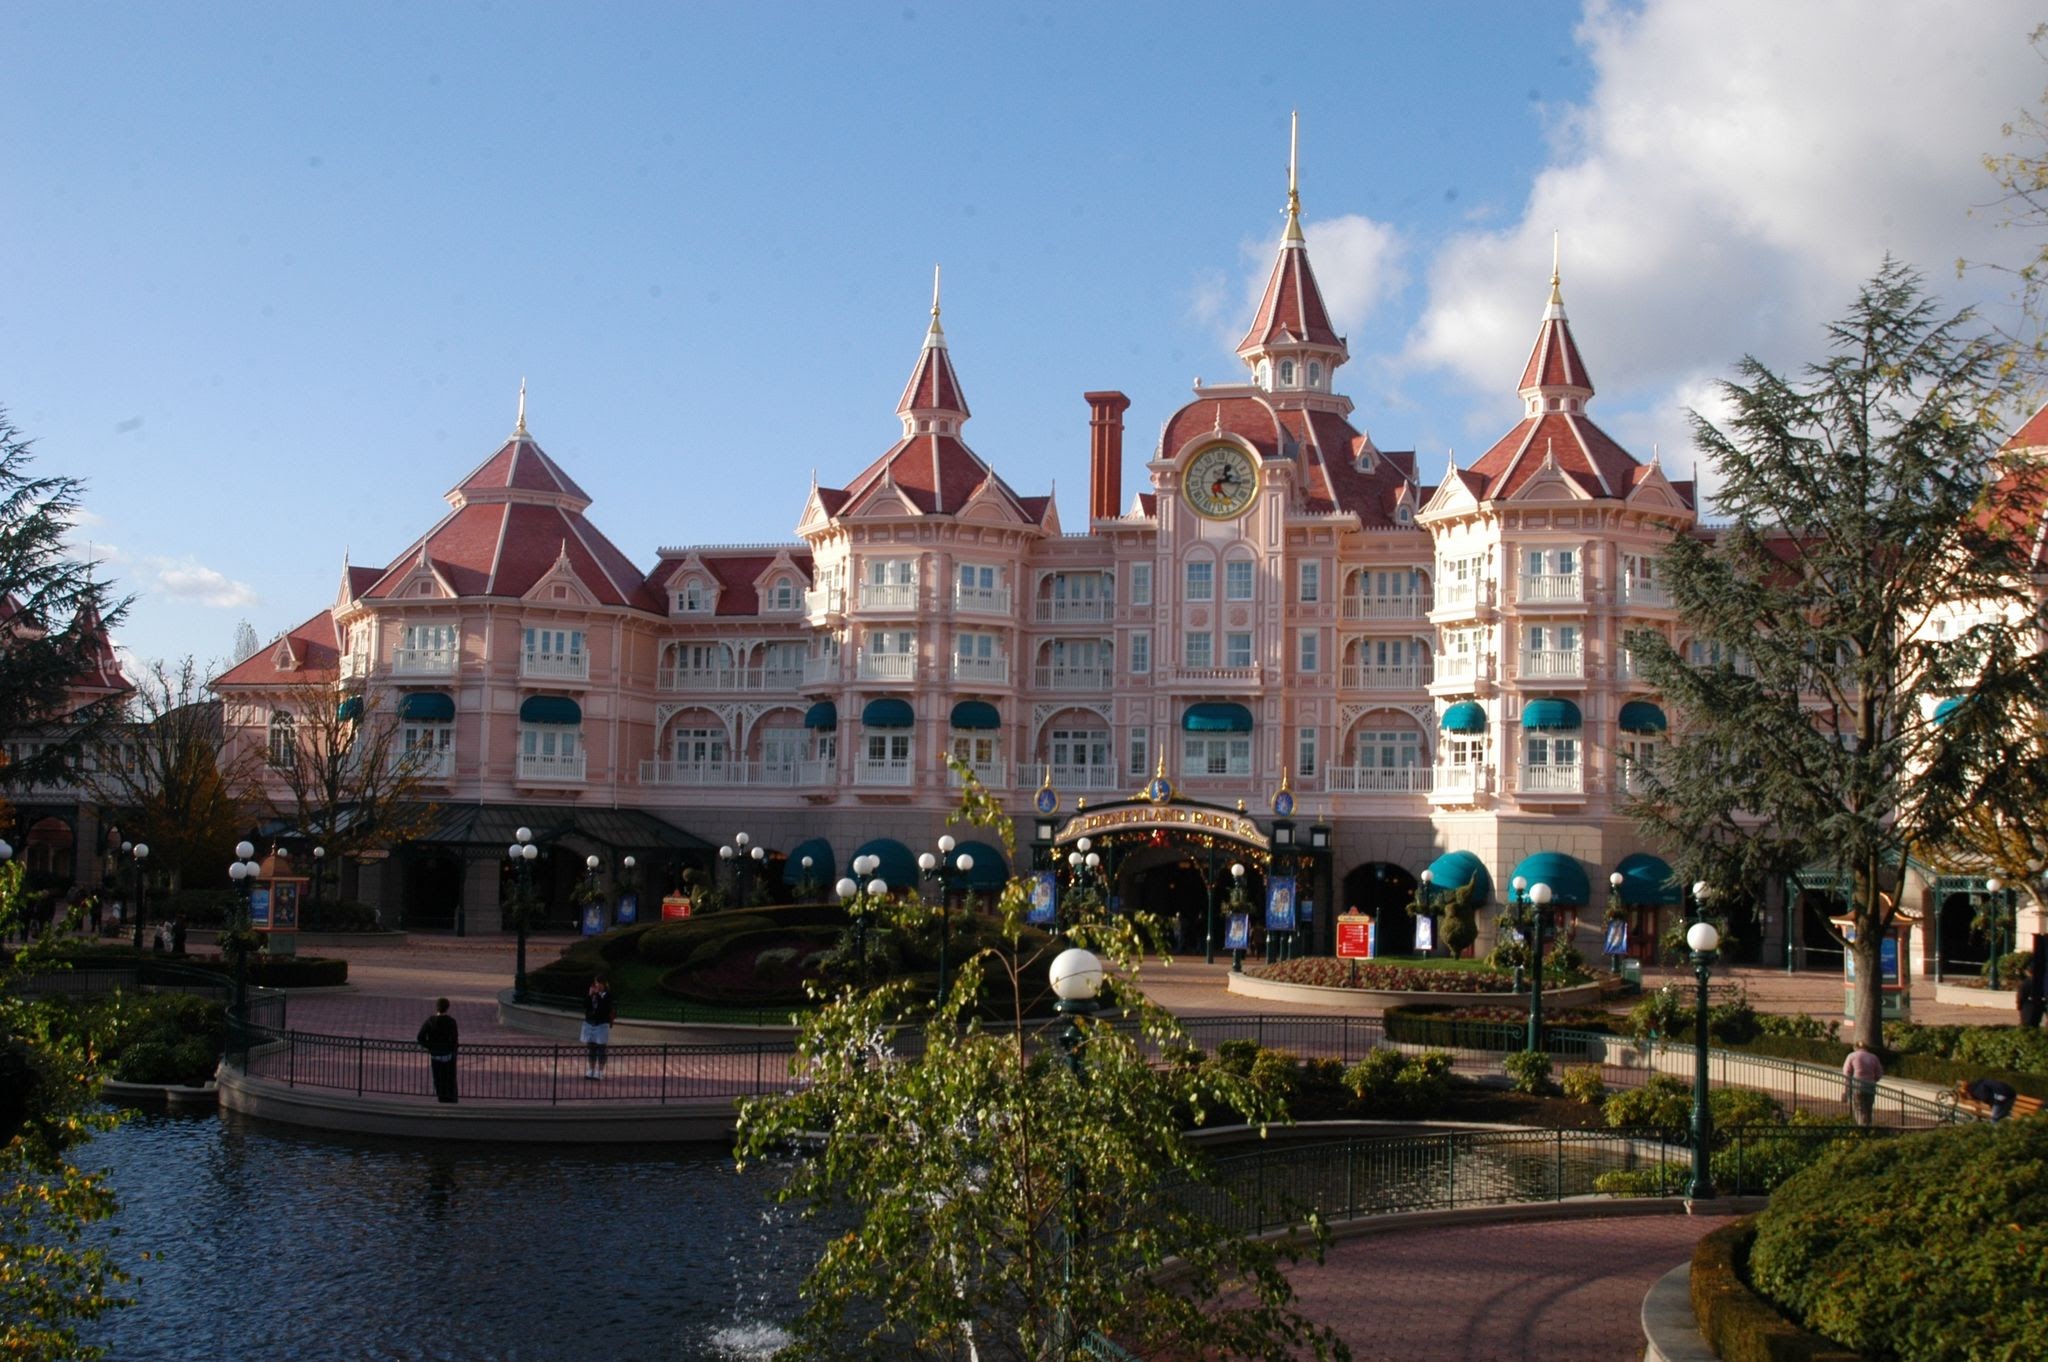 Disneyland Hotel Update from D23, first glimpse at The Royal Banquet